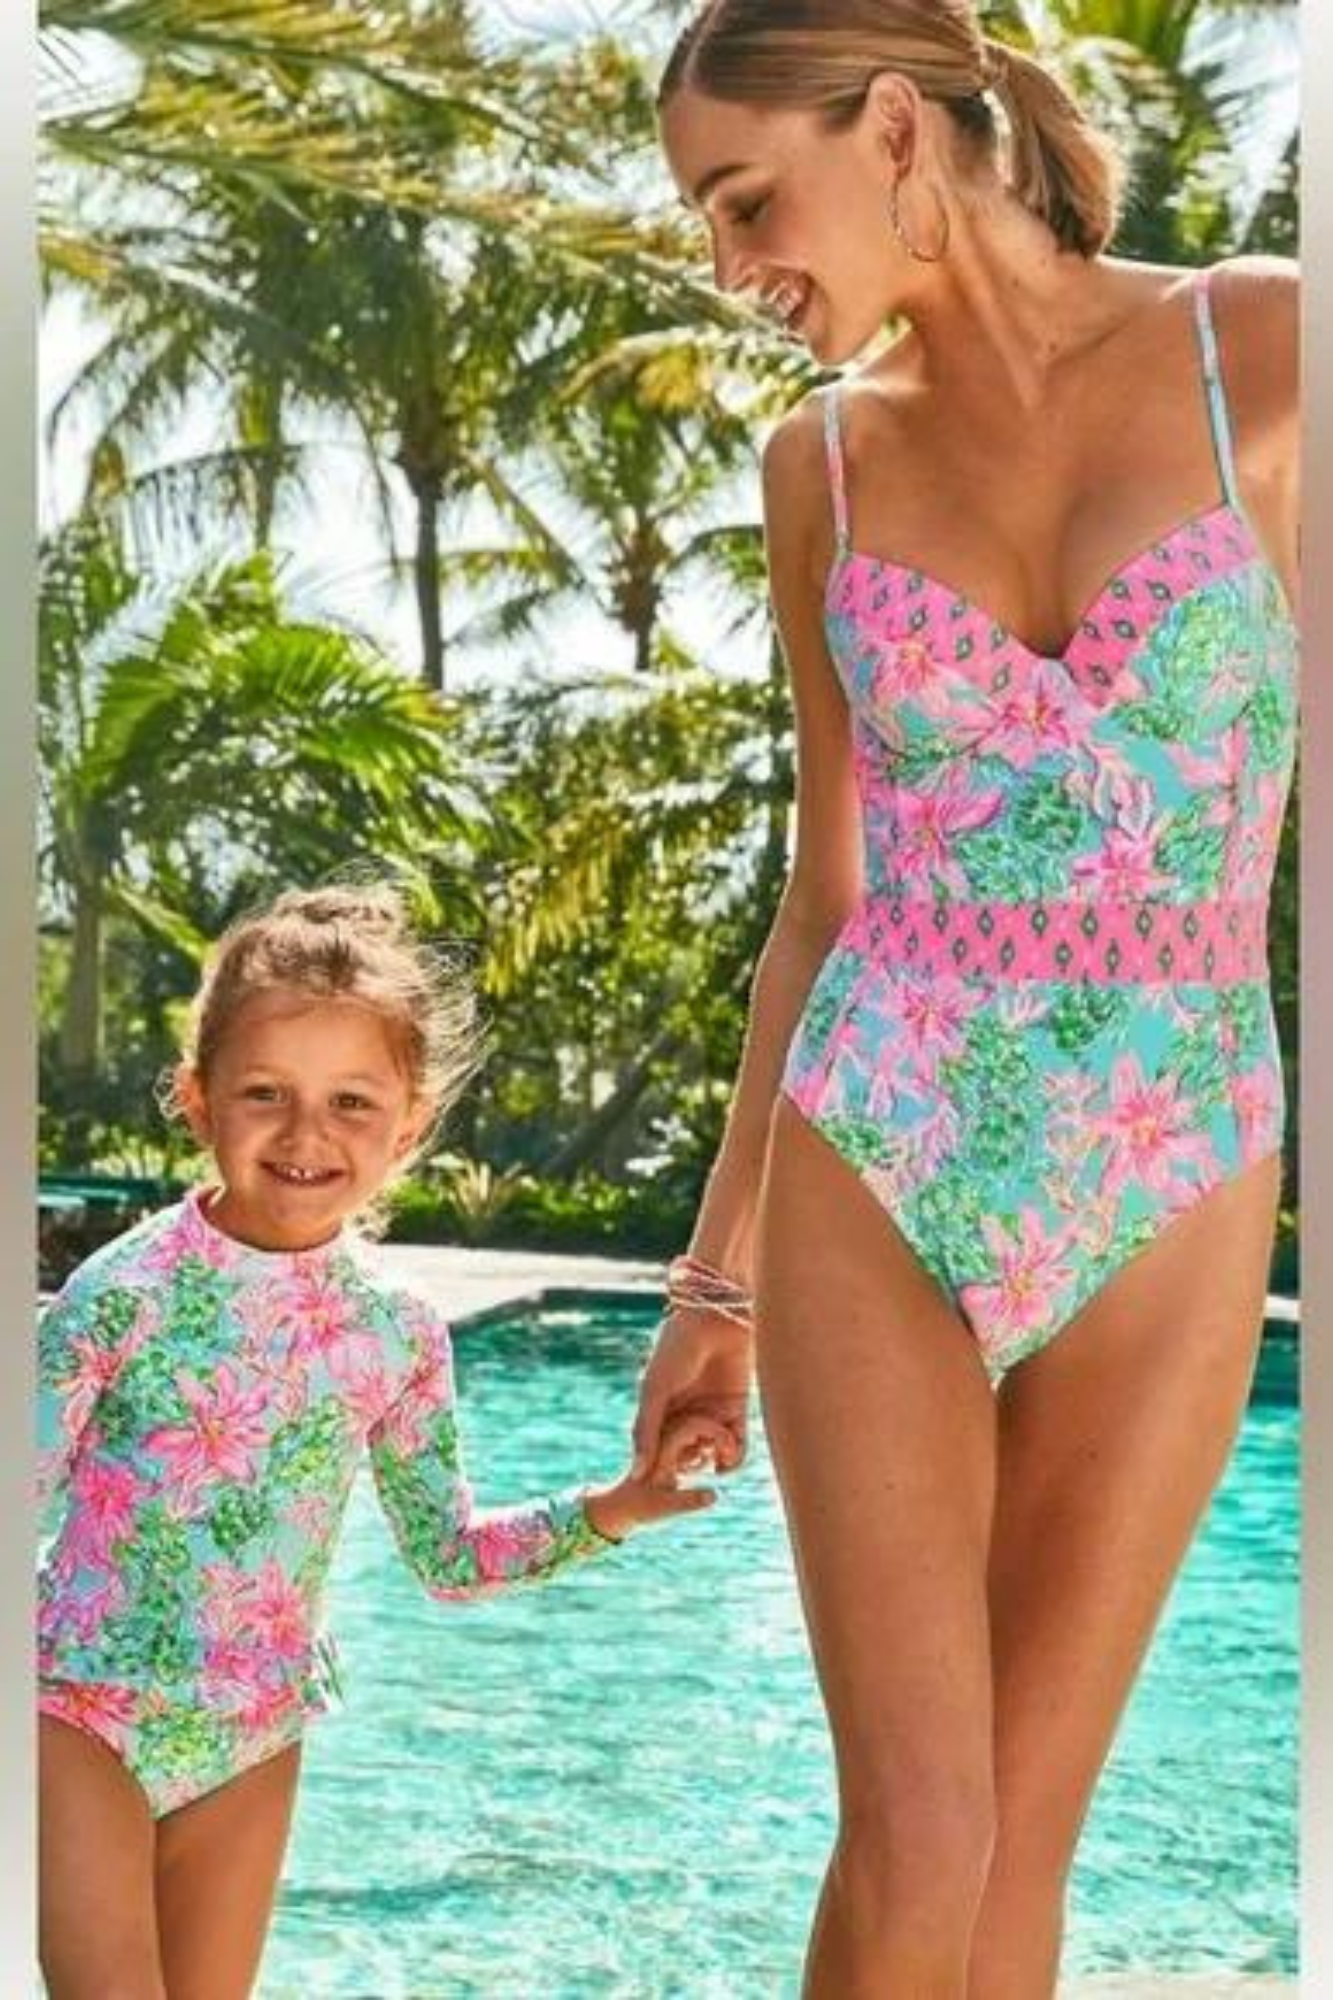 Lilly Pulitzer Palma One Piece swimsuit in Surf Blue So Shellegant